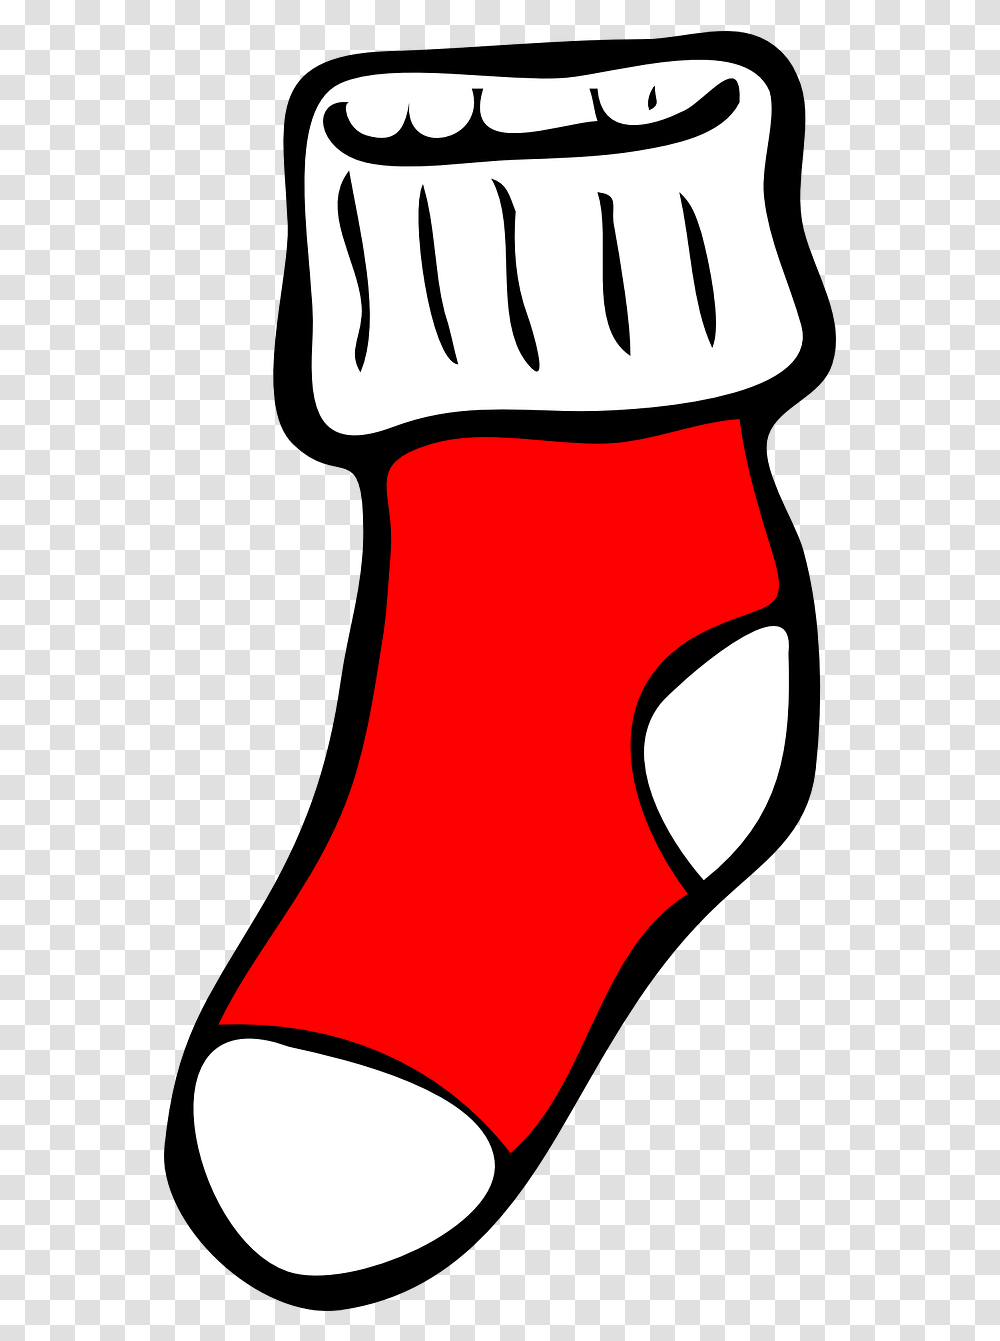 Stocking Christmas Sock Free Vector Graphic On Pixabay Sock Clipart, Christmas Stocking, Gift Transparent Png